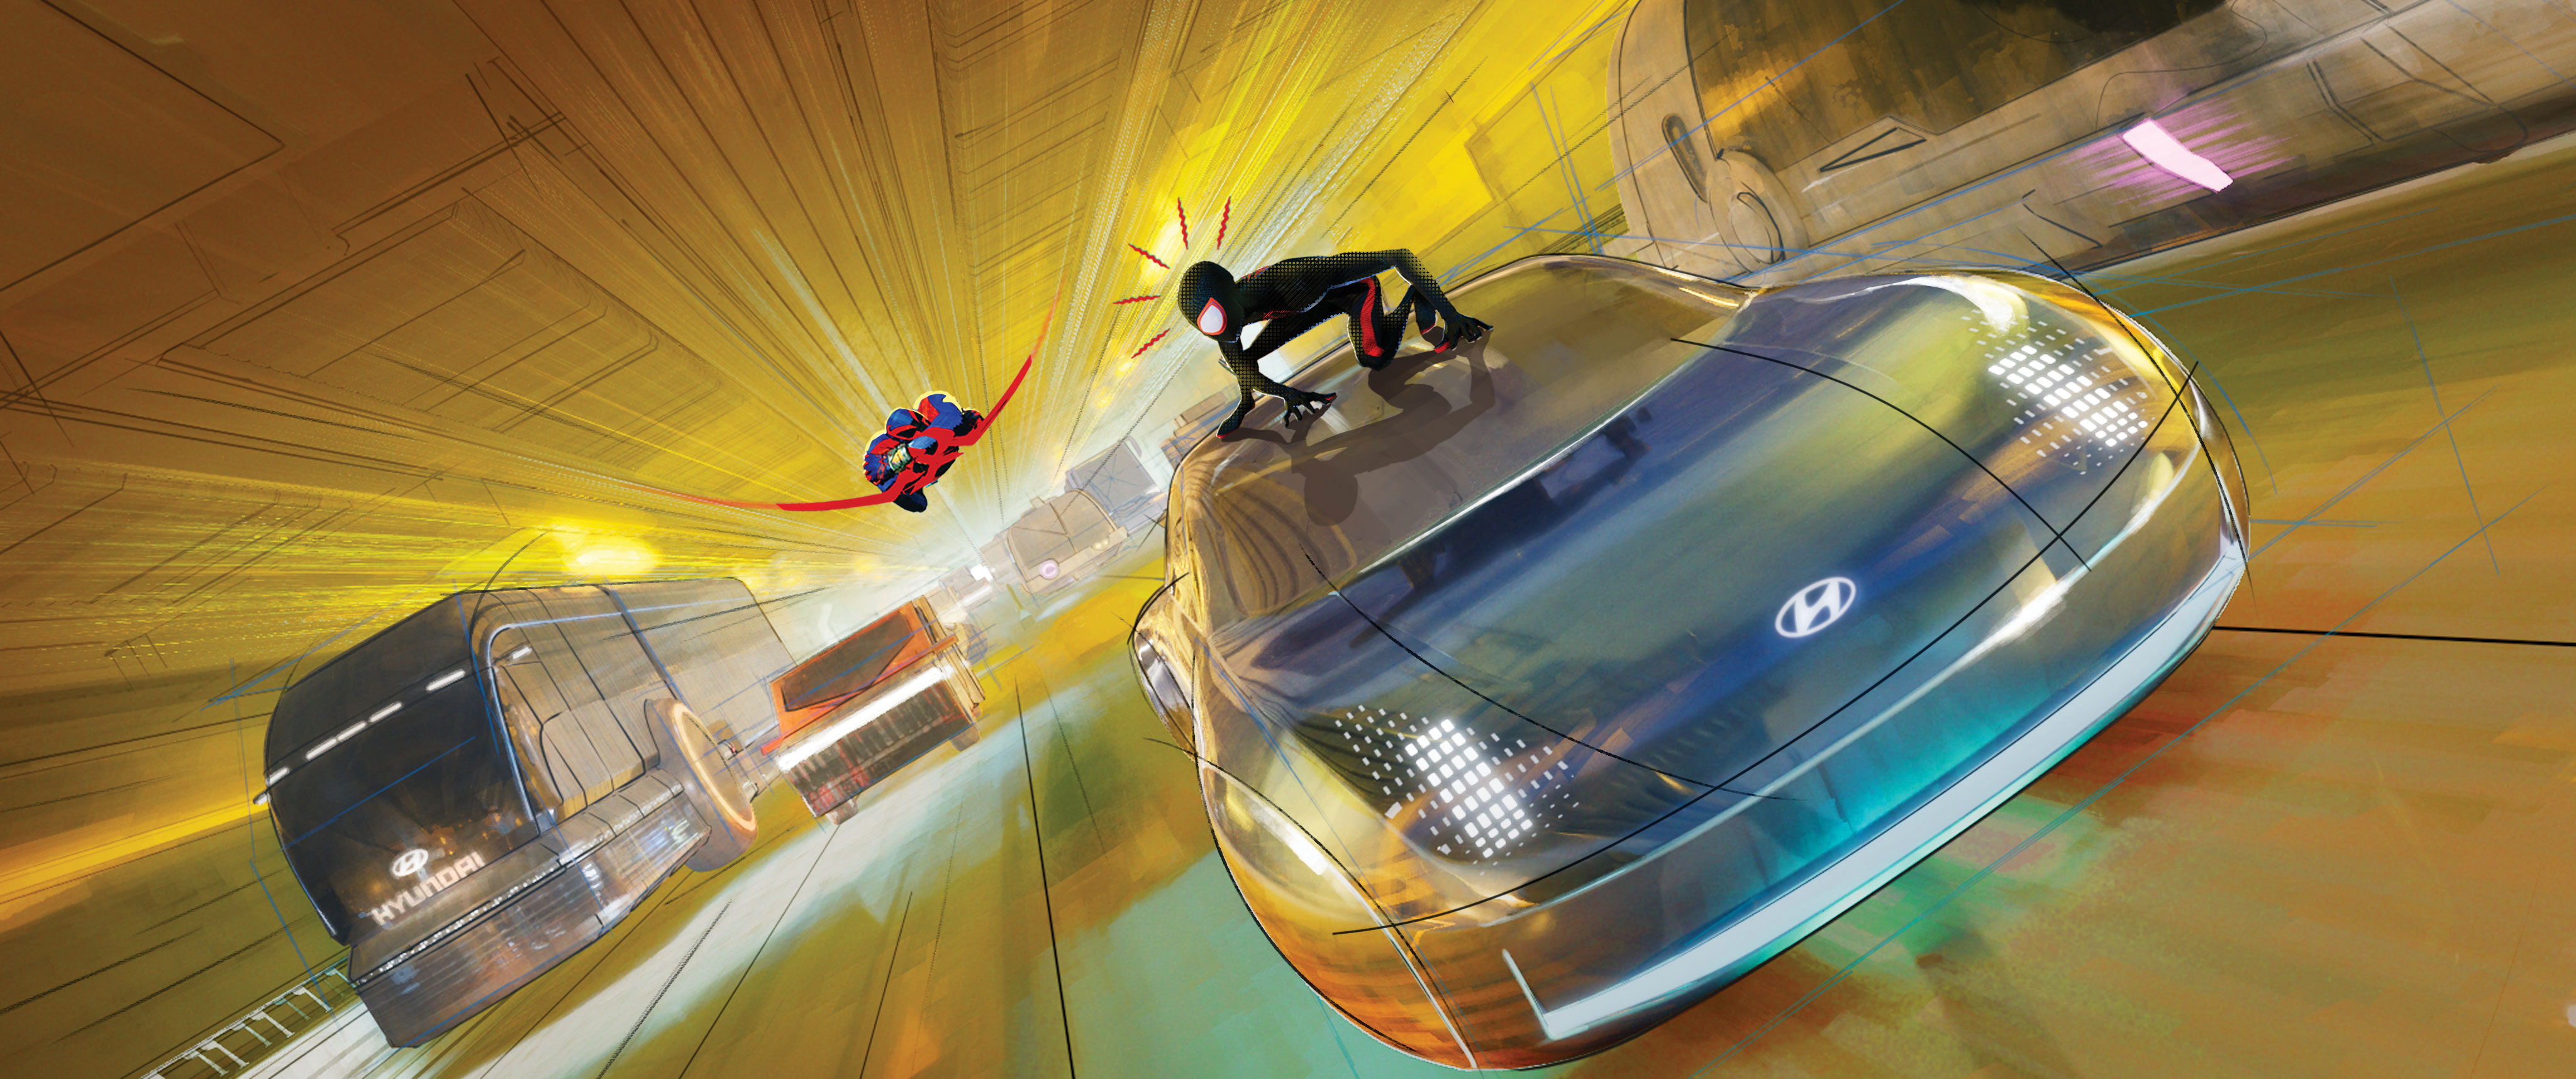 Hyundai Motor and Sony Pictures Team Up for the Third Time with ‘Spider-Man:Across the Spider-Verse’